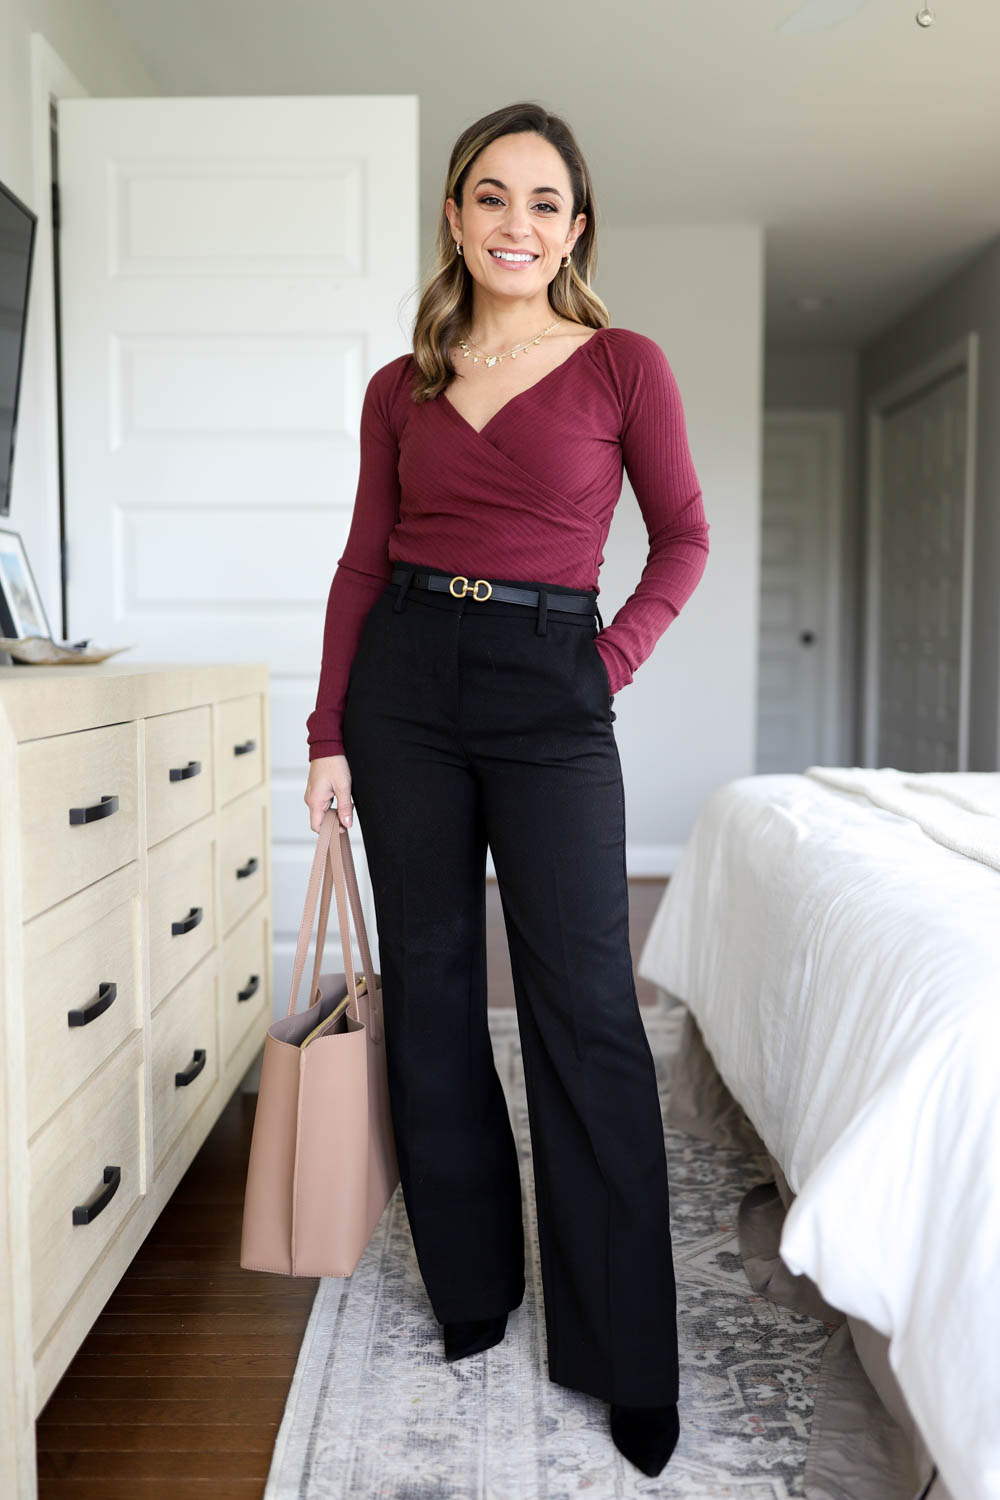 One week of outfit ideas for work via pumps and push-ups blog | petite friendly outfits for work | outfits for work with boots | business casual outfits for work | winter outfits for work | warm outfits for work 